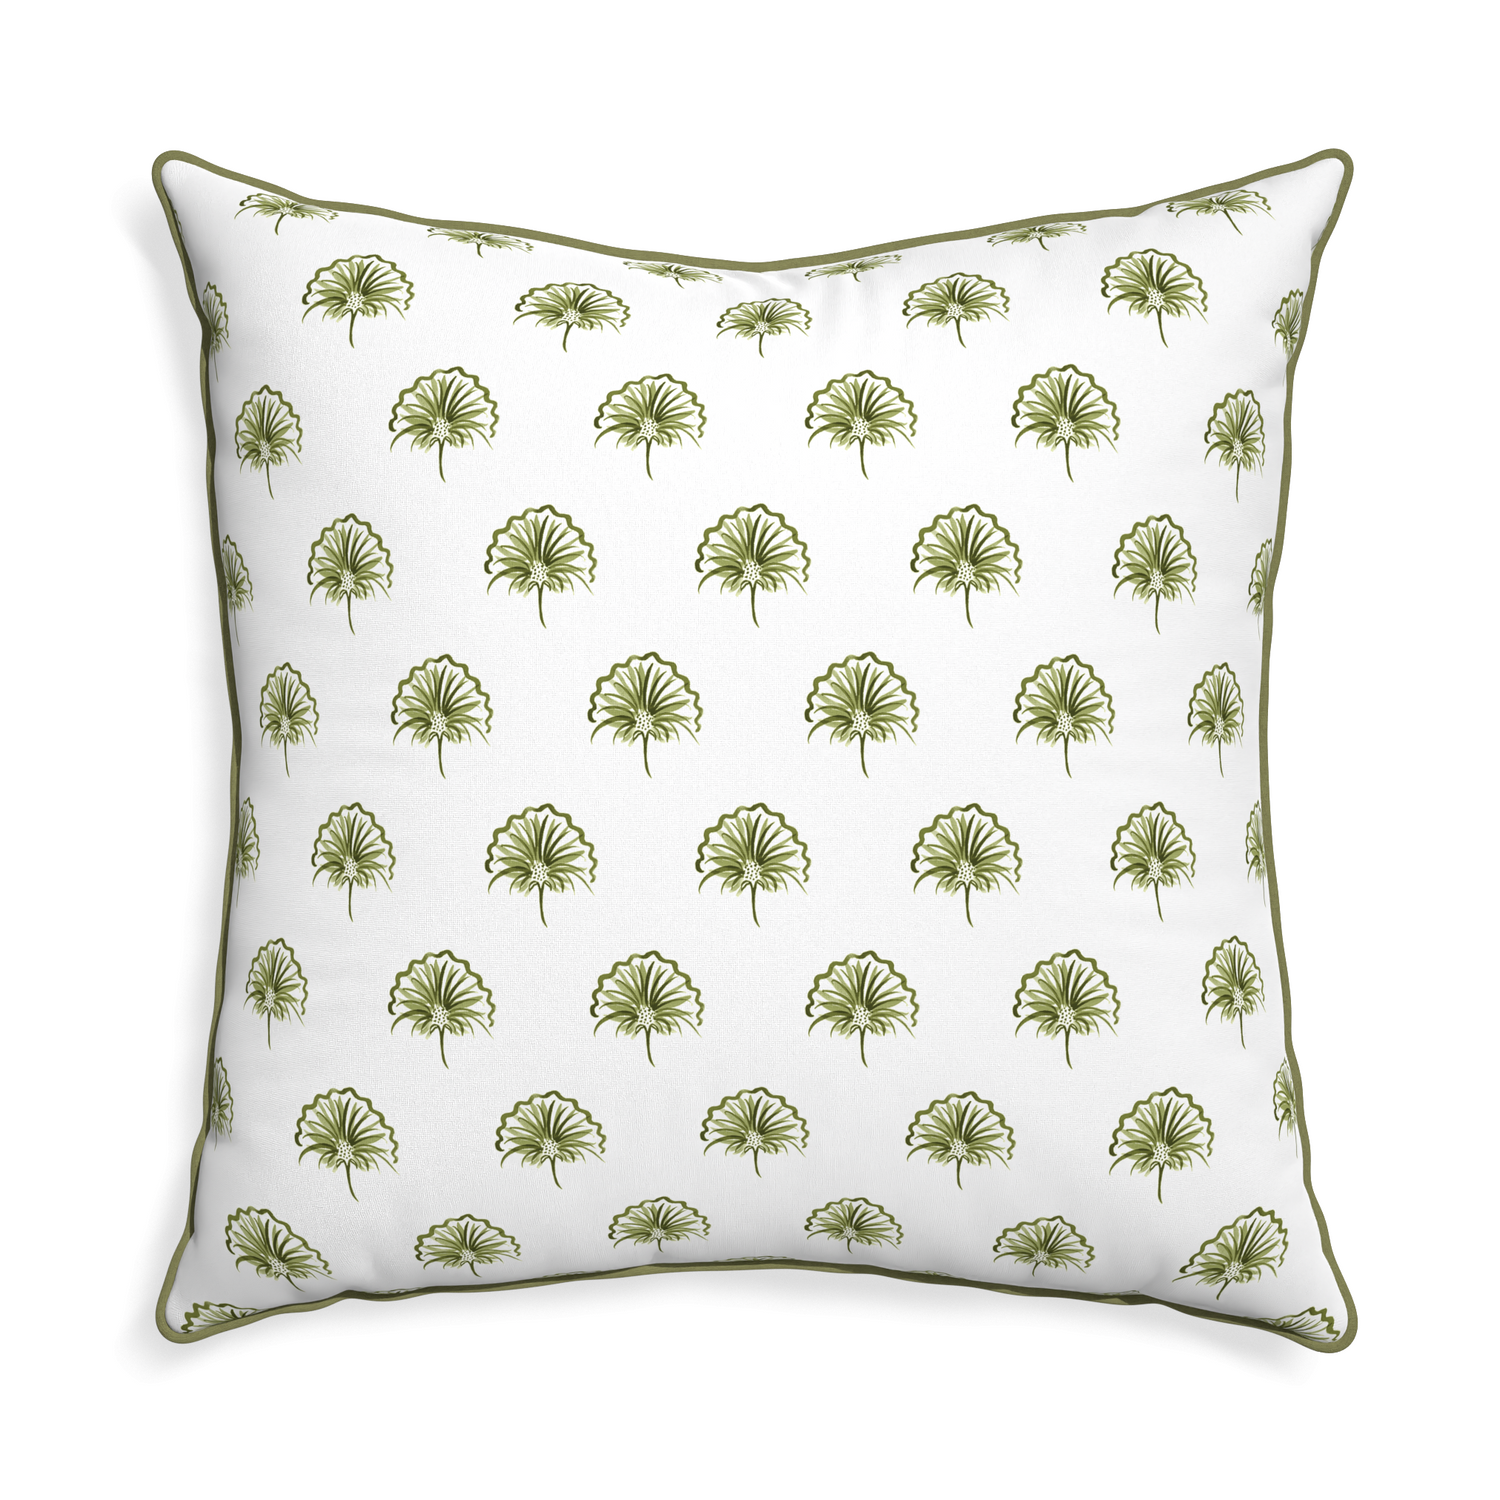 Euro-sham penelope moss custom pillow with moss piping on white background